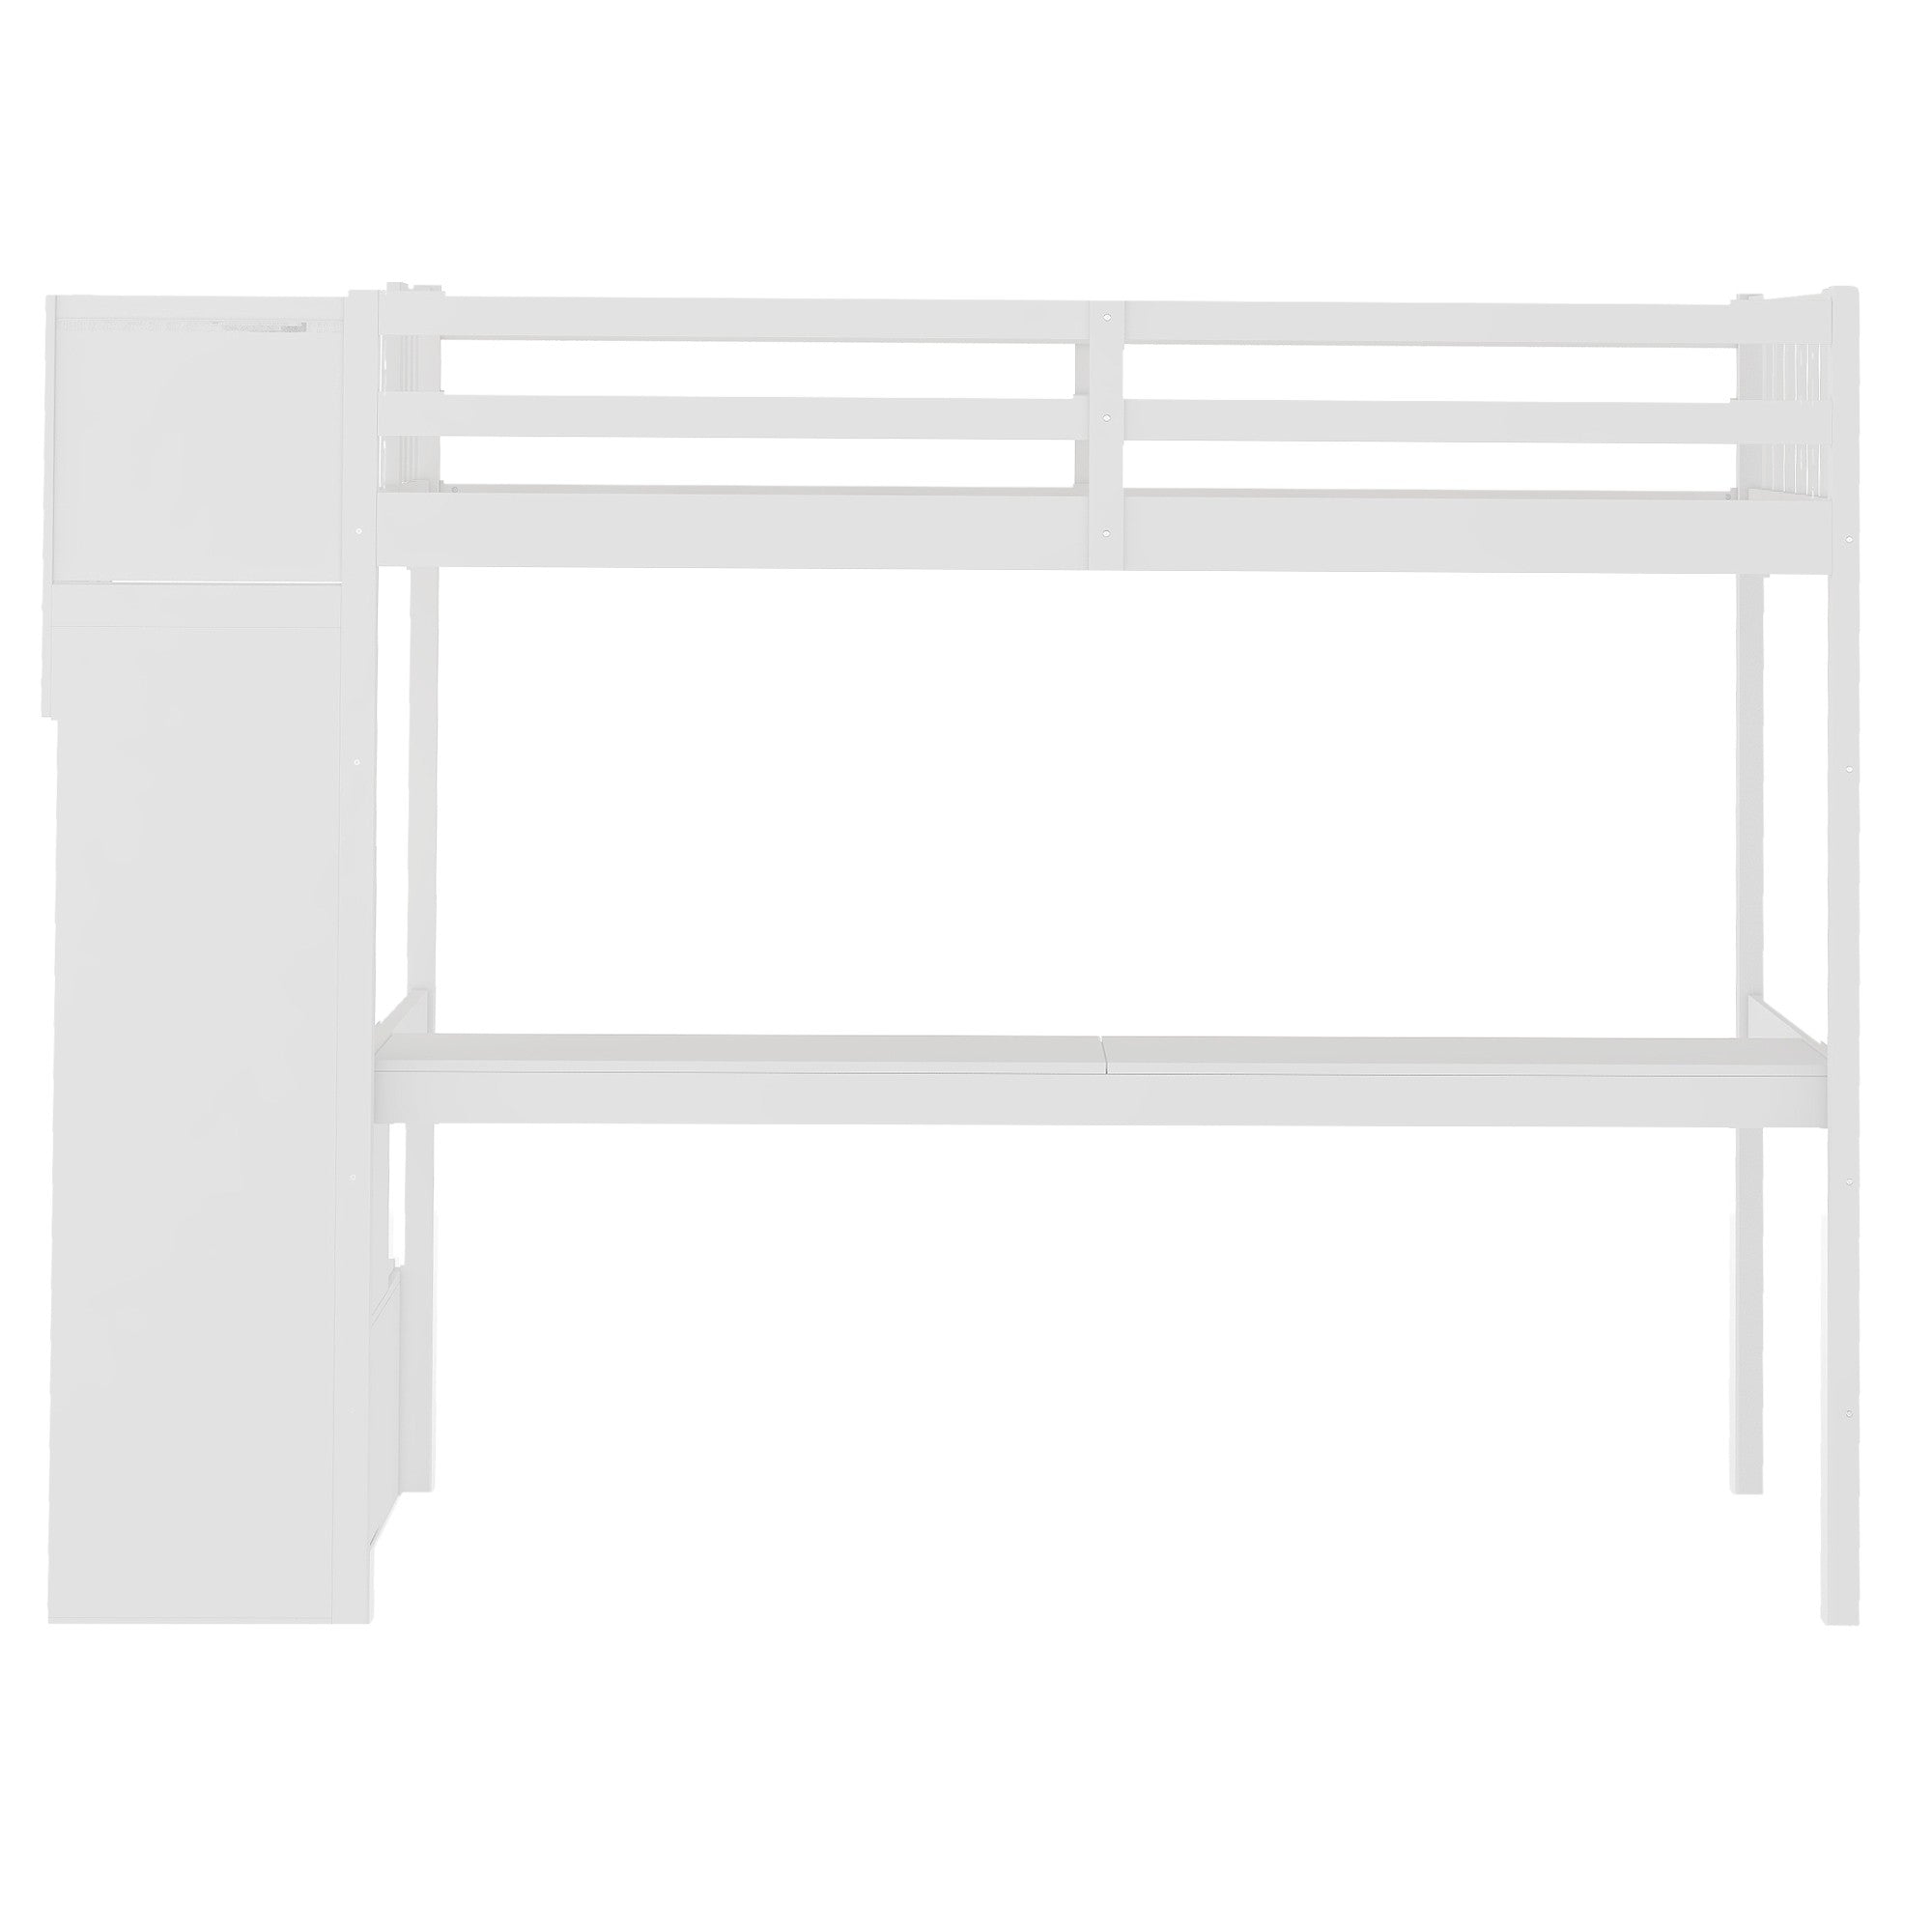 White Twin Size Loft Bed with Built In Desk and Stairway